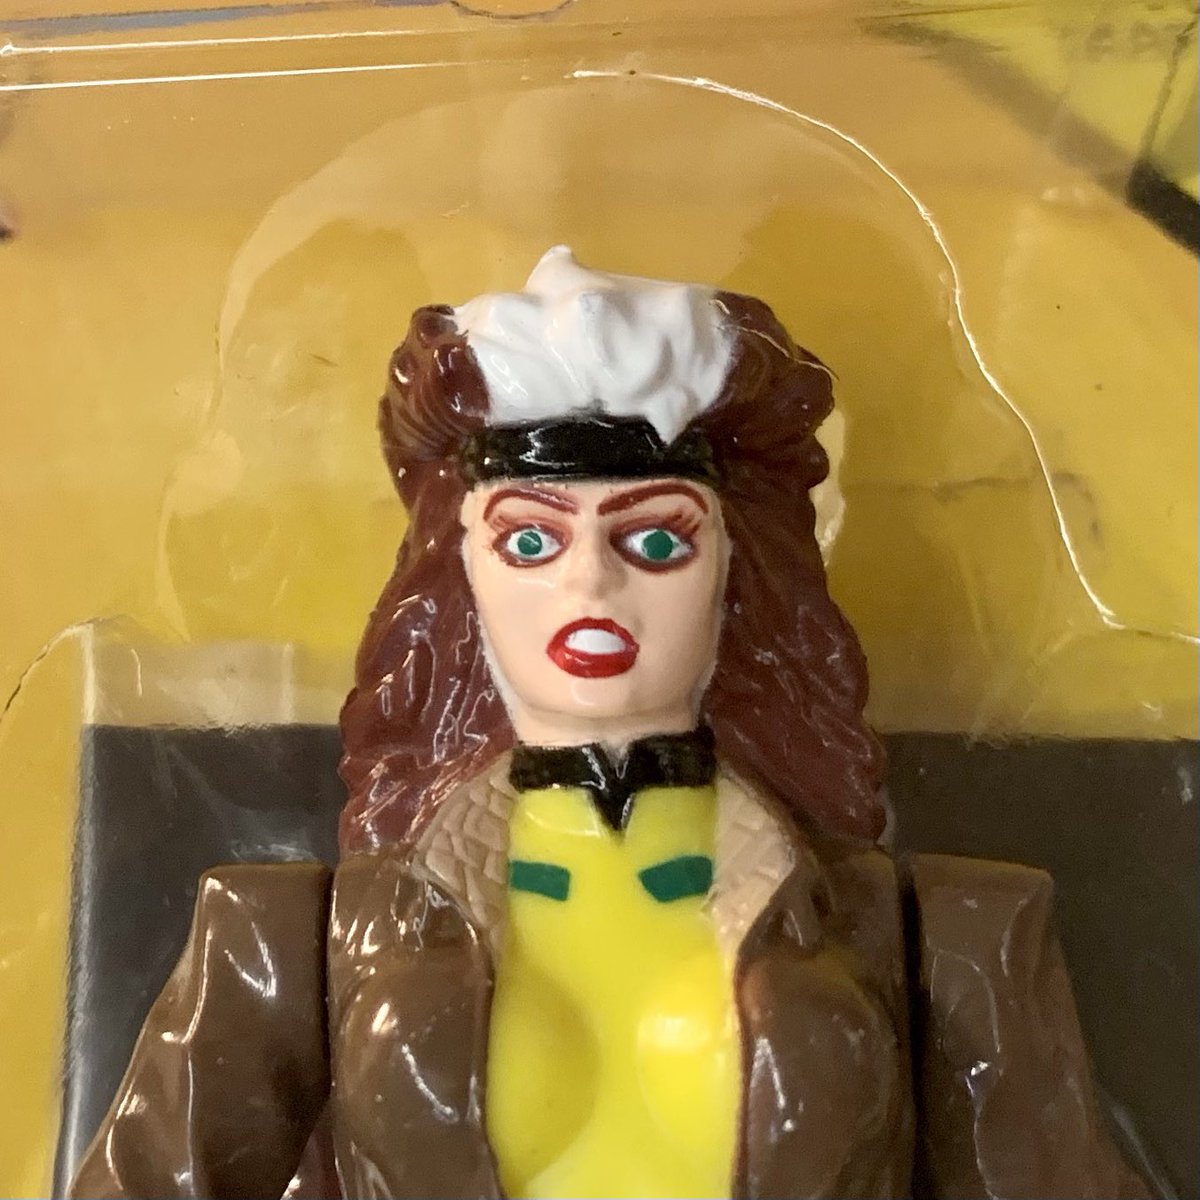 The 1990s X-Men Rogue figure has seen some things.